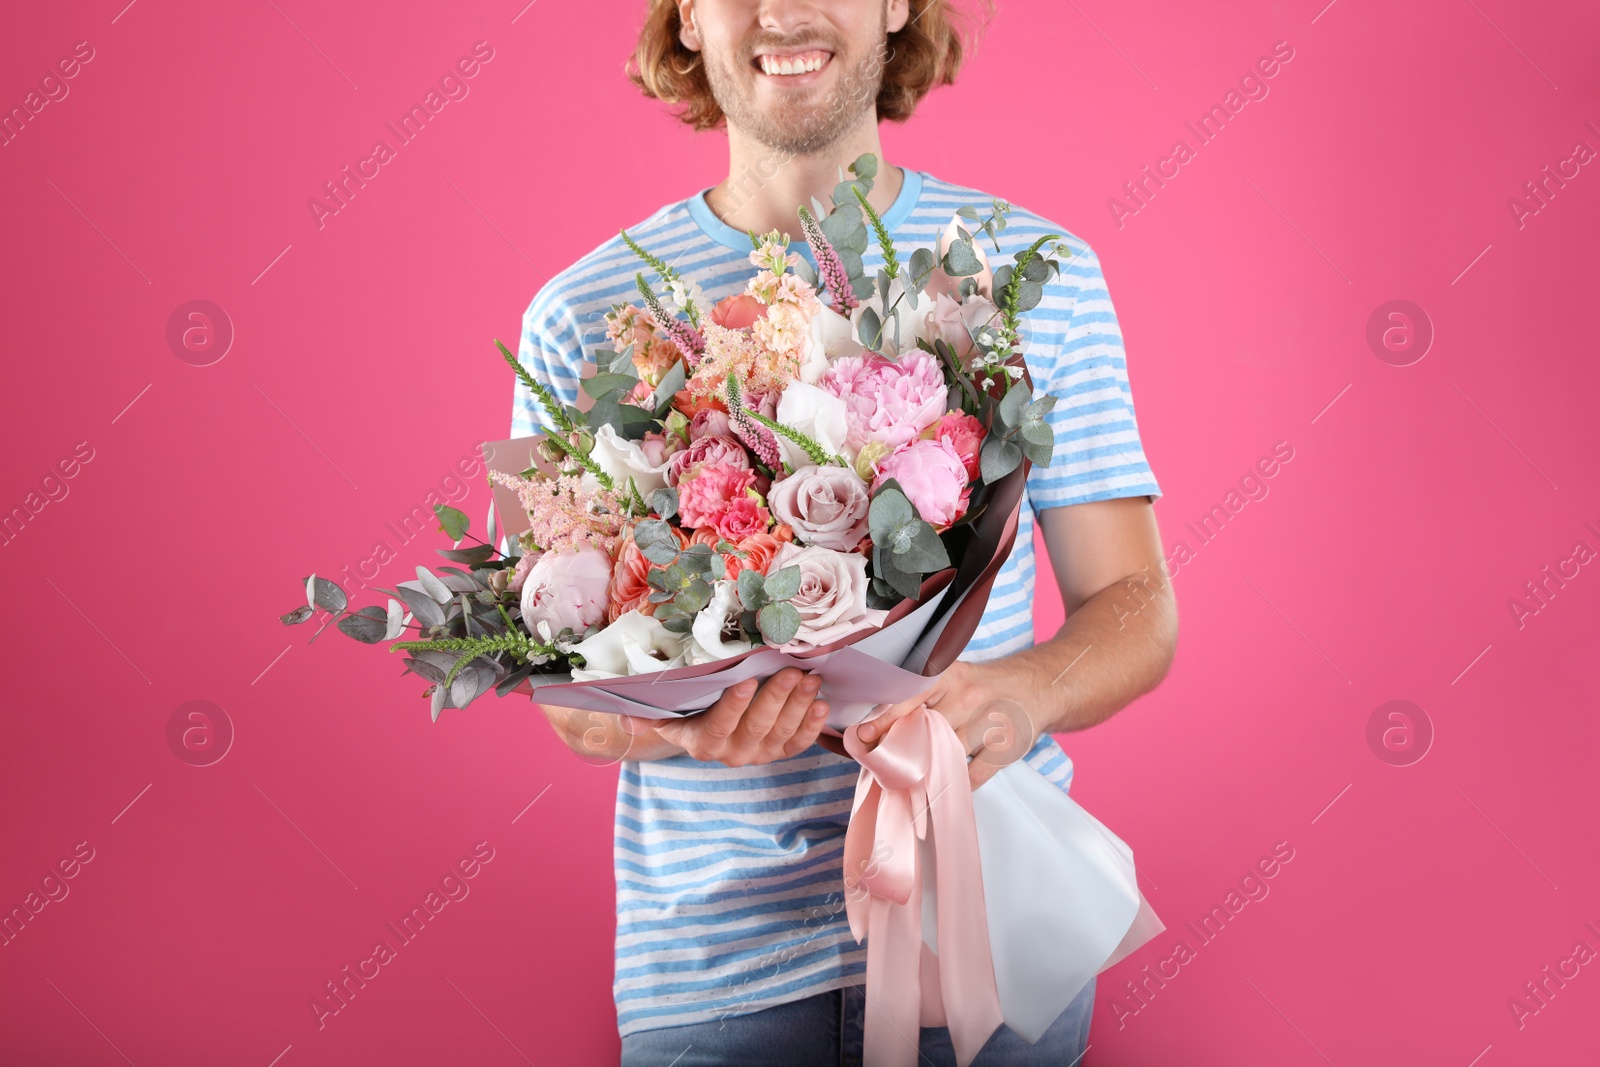 Photo of Man holding beautiful flower bouquet on pink background, closeup view